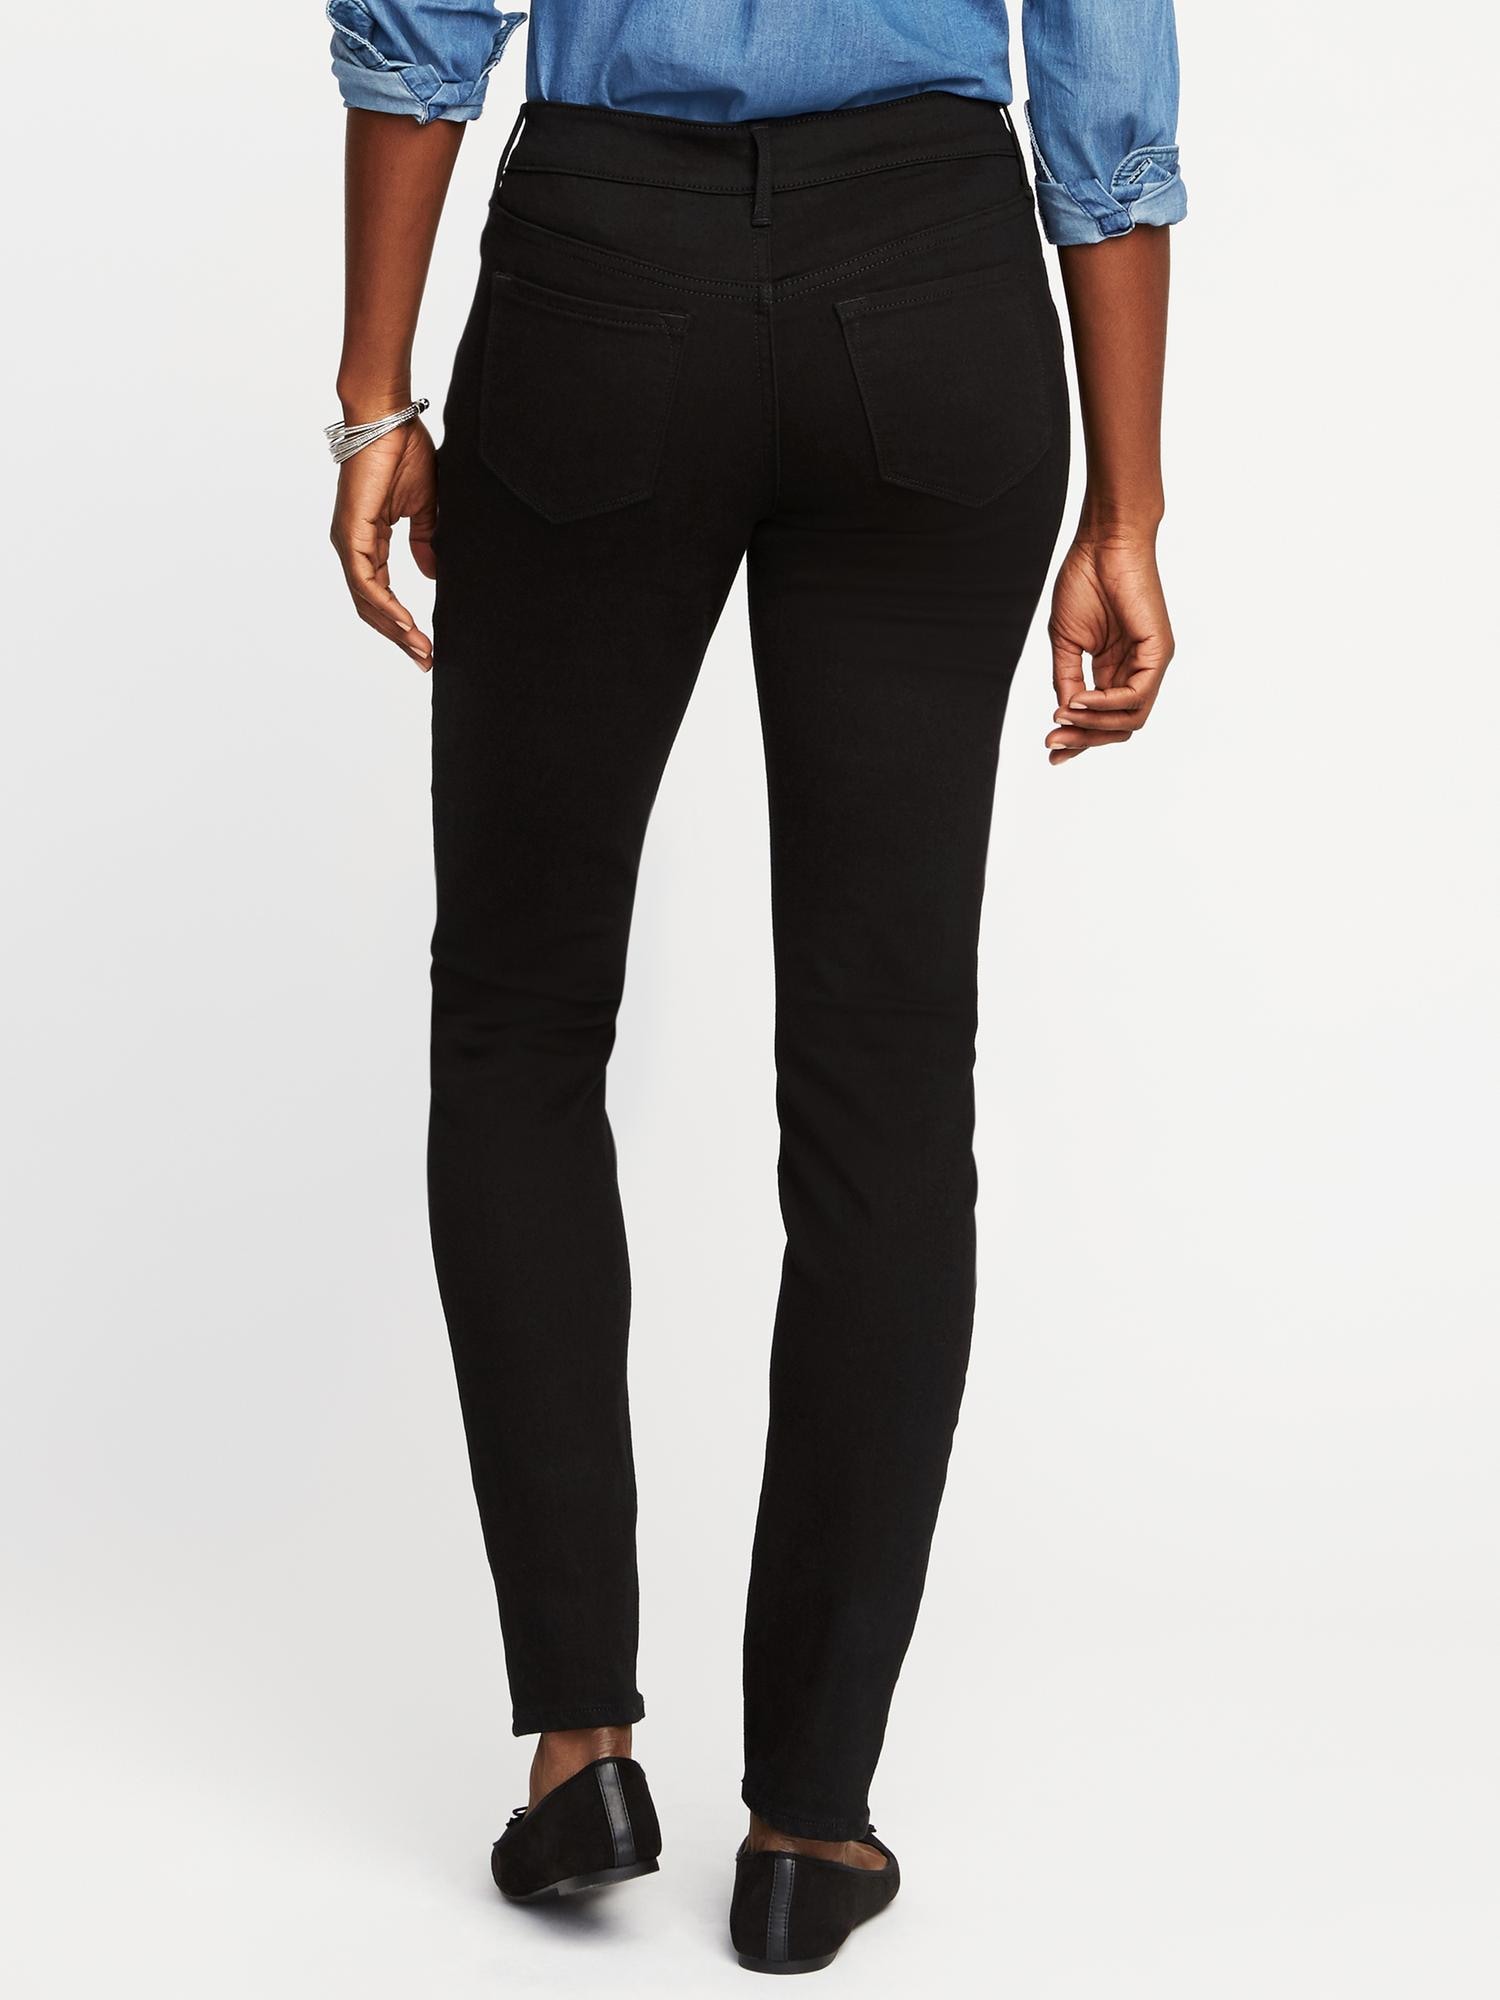 Mid-Rise Never-Fade Rockstar Black Jeans for Women | Old Navy